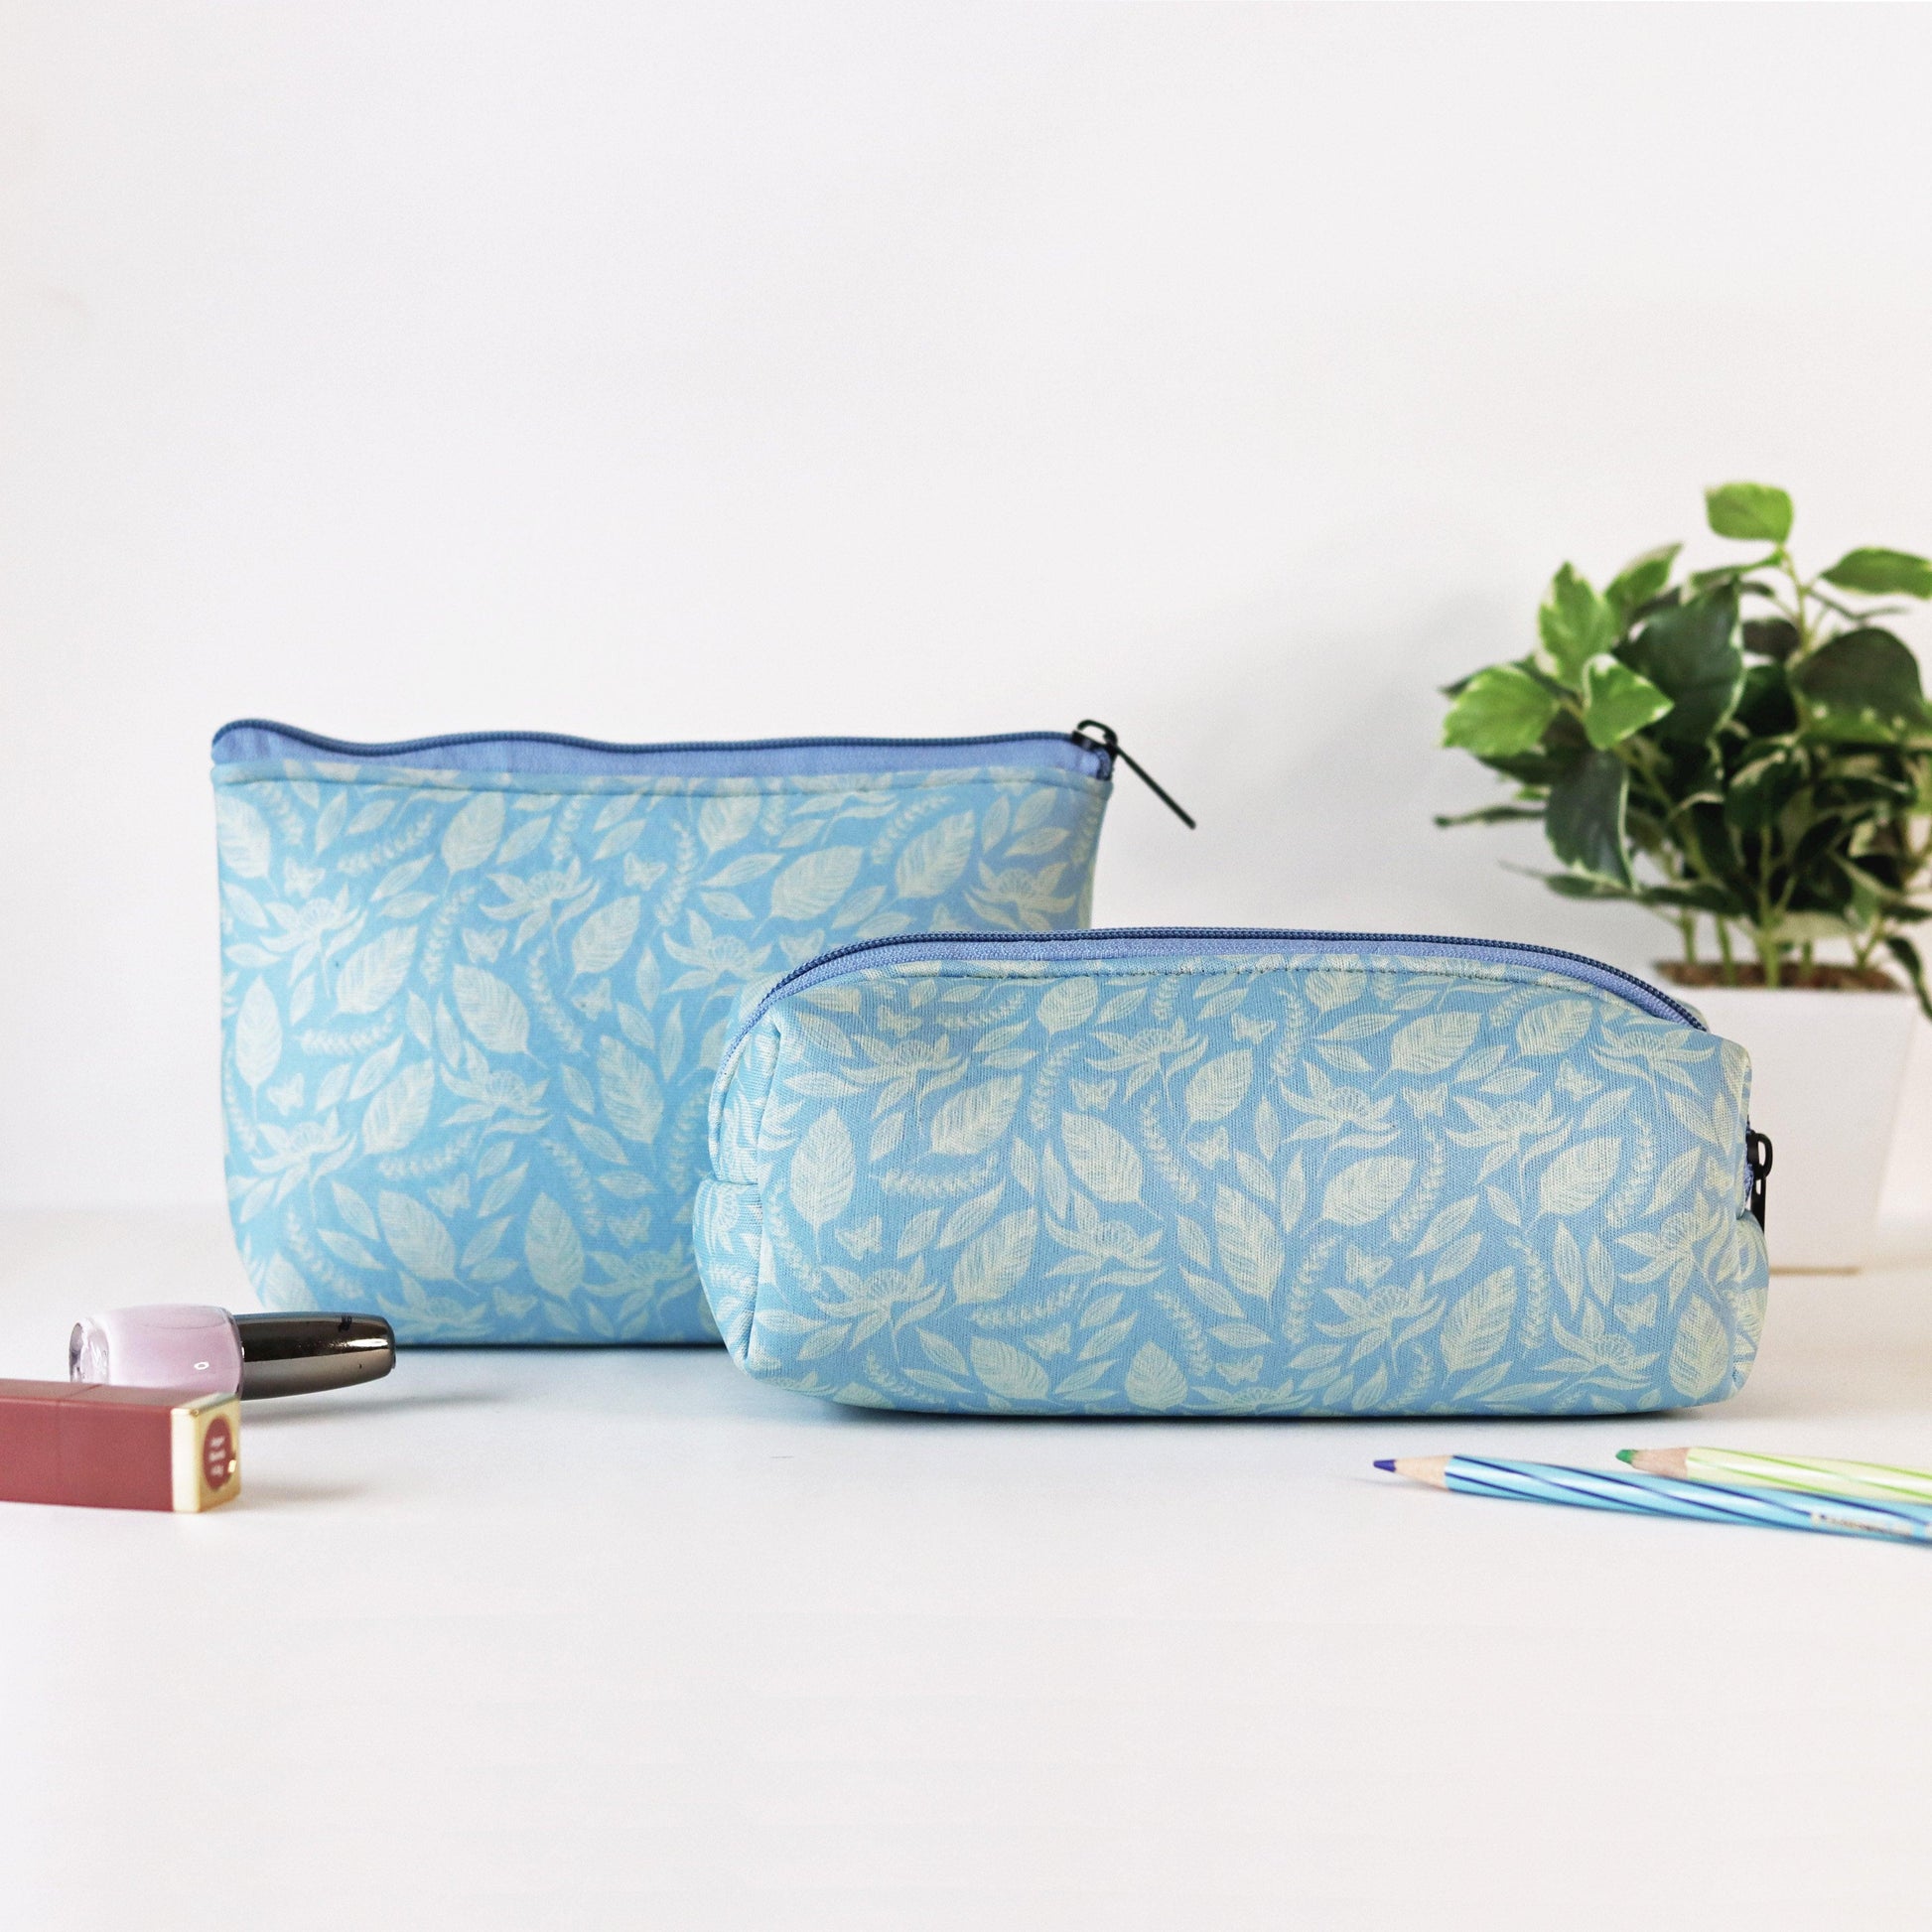 Sky Blue Blossoms Cosmetic Pouches - Set of 2 - Strokes by Namrata Mehta